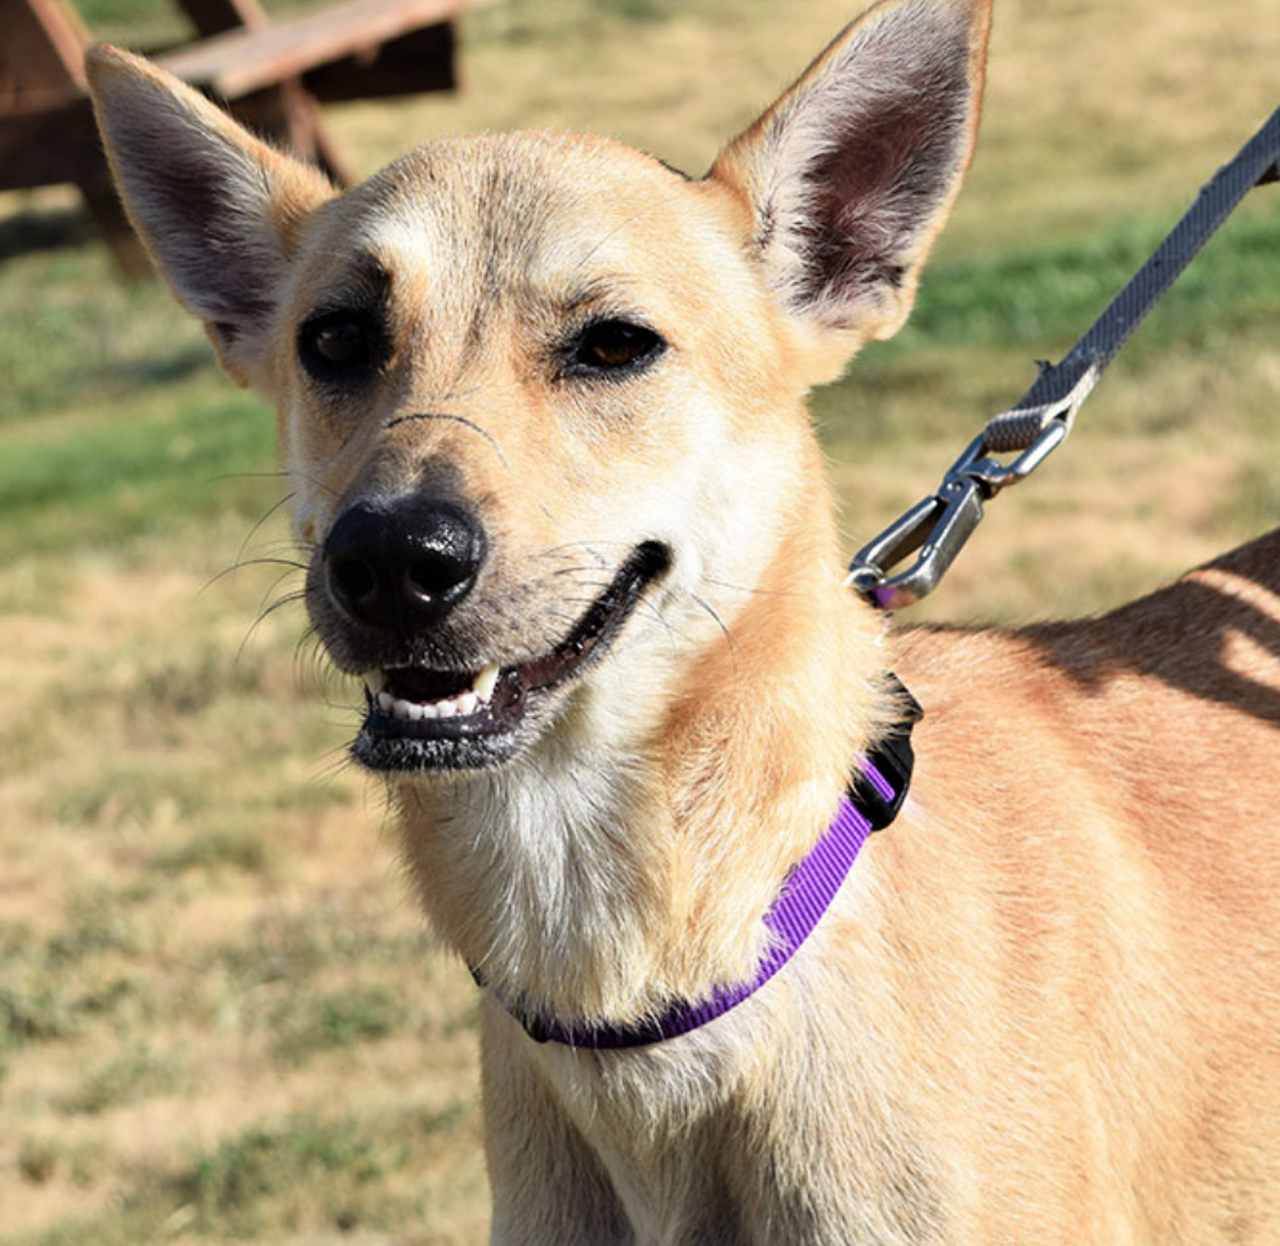 Laura
"Hi, I’m Laura! I’m a sweet girl who is just as pretty on the inside as on the outside. I’ve got plenty of energy and I’m well mannered. I’m settling in my new environment nicely, but there’s something missing…you! How about we have some fun together?"